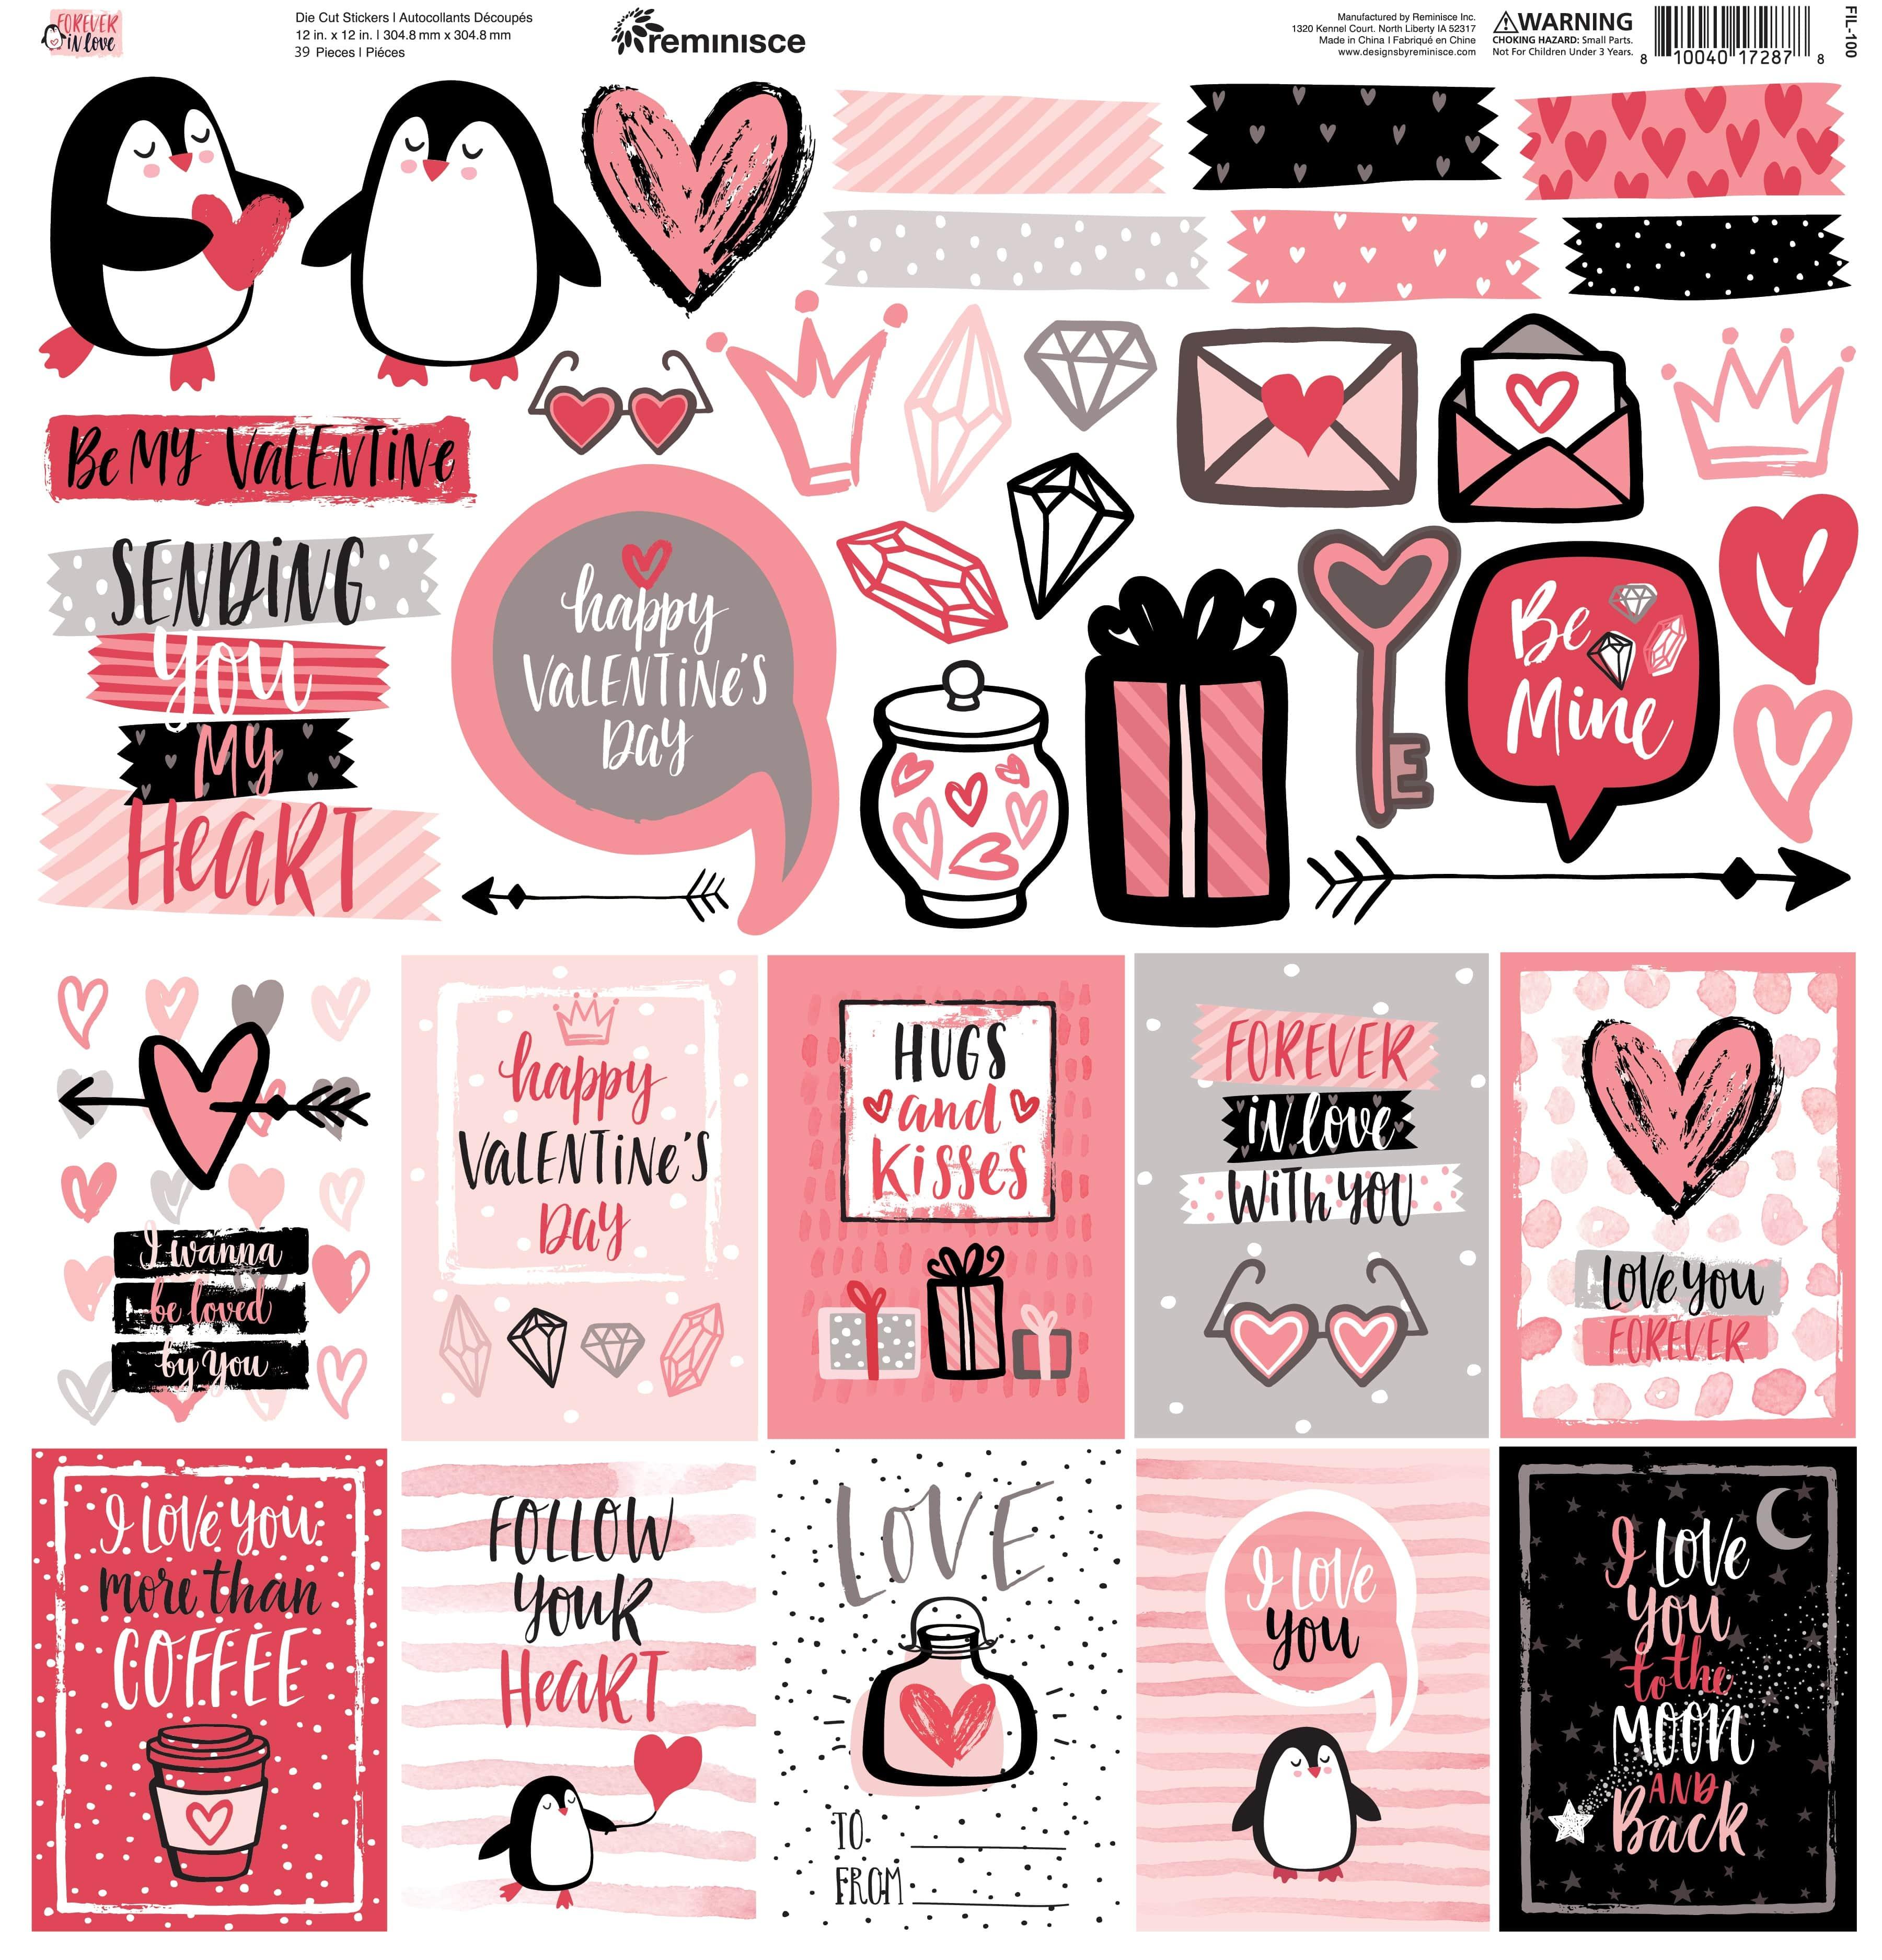 Forever In Love Collection 12 x 12 Scrapbook Sticker Sheet by Reminisce - Scrapbook Supply Companies